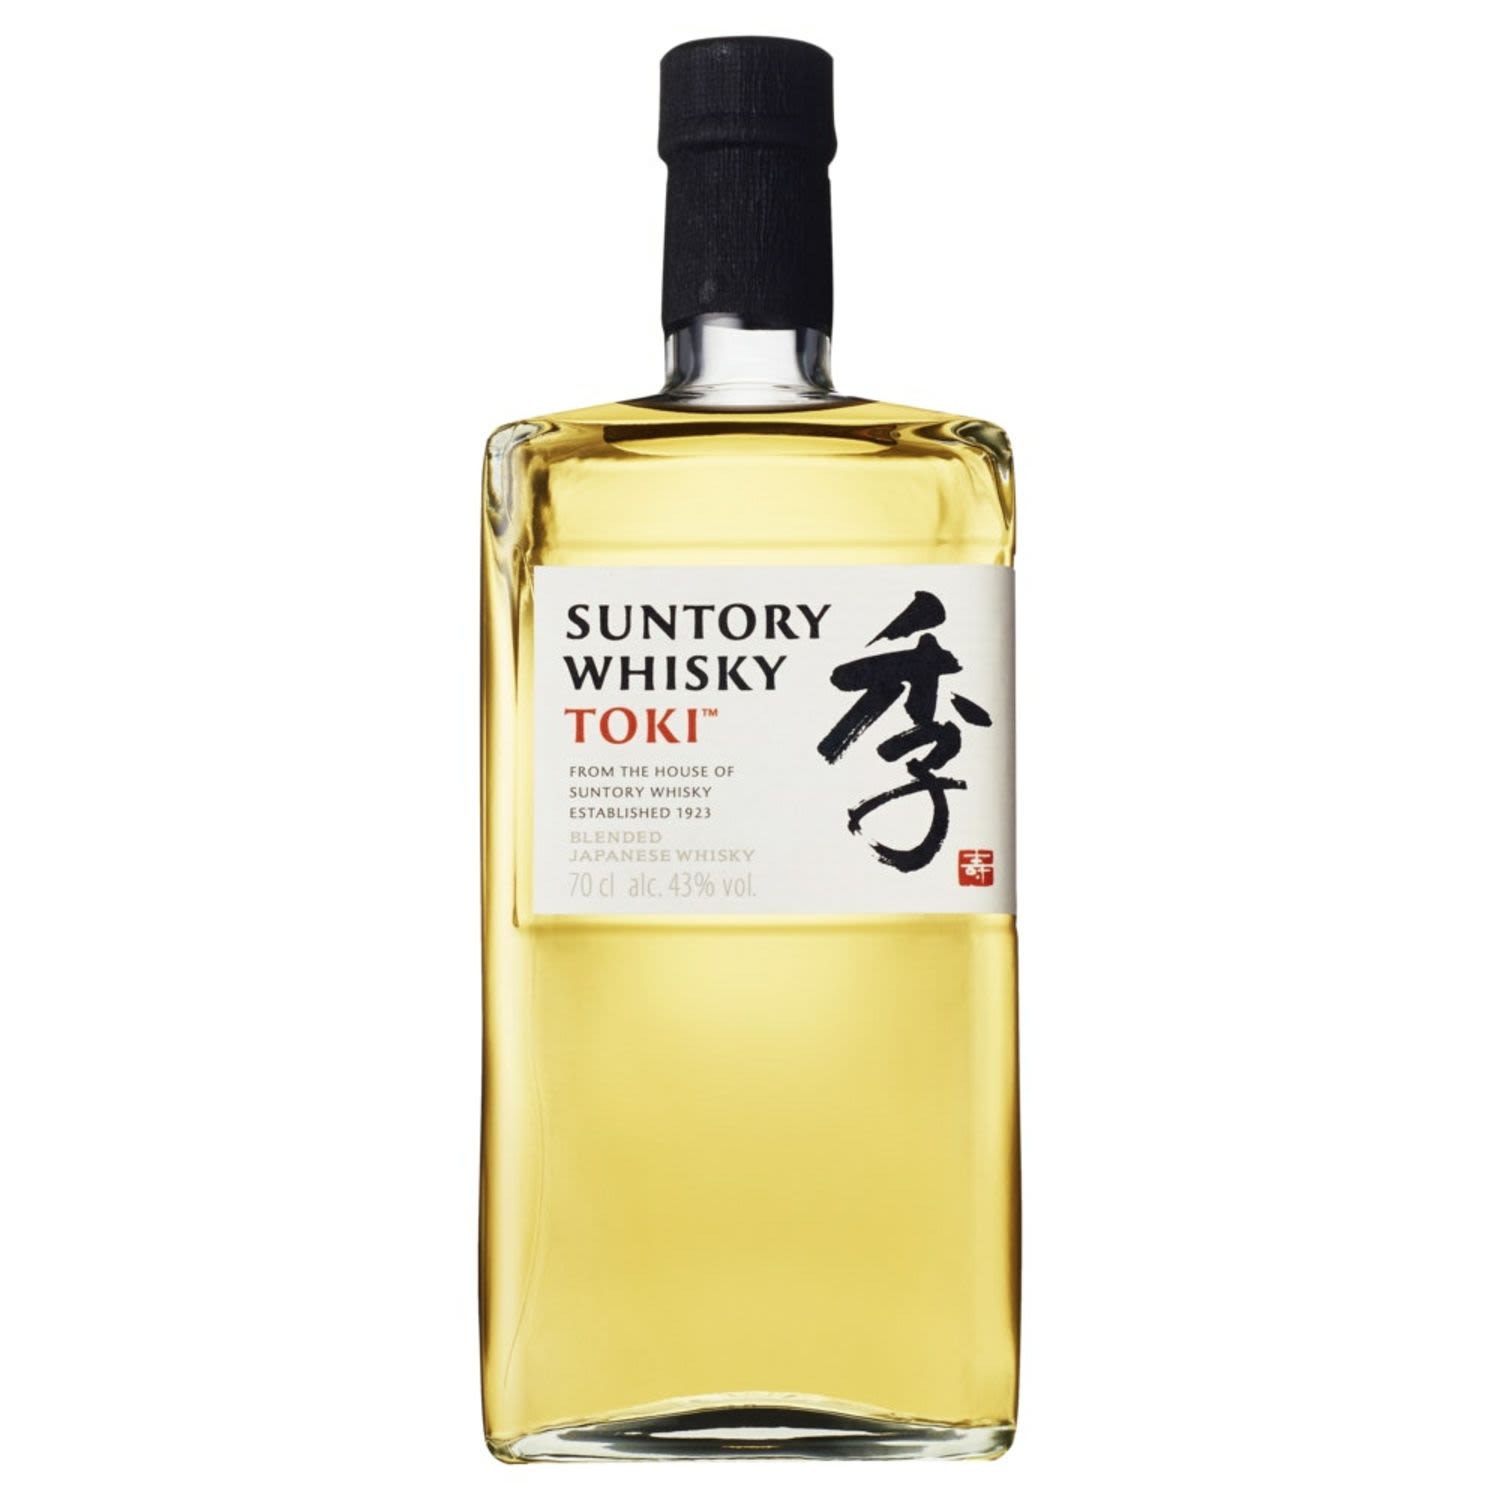 Inspired by that interplay, Suntory Whisky Toki® brings together old and new -the House of Suntory's proud heritage and its innovative spirit- to create blended Japanese whisky that is both ground-breaking and timeless.<br /> <br />Alcohol Volume: 43.00%<br /><br />Pack Format: Bottle<br /><br />Standard Drinks: 23.8<br /><br />Pack Type: Bottle<br /><br />Country of Origin: Japan<br />